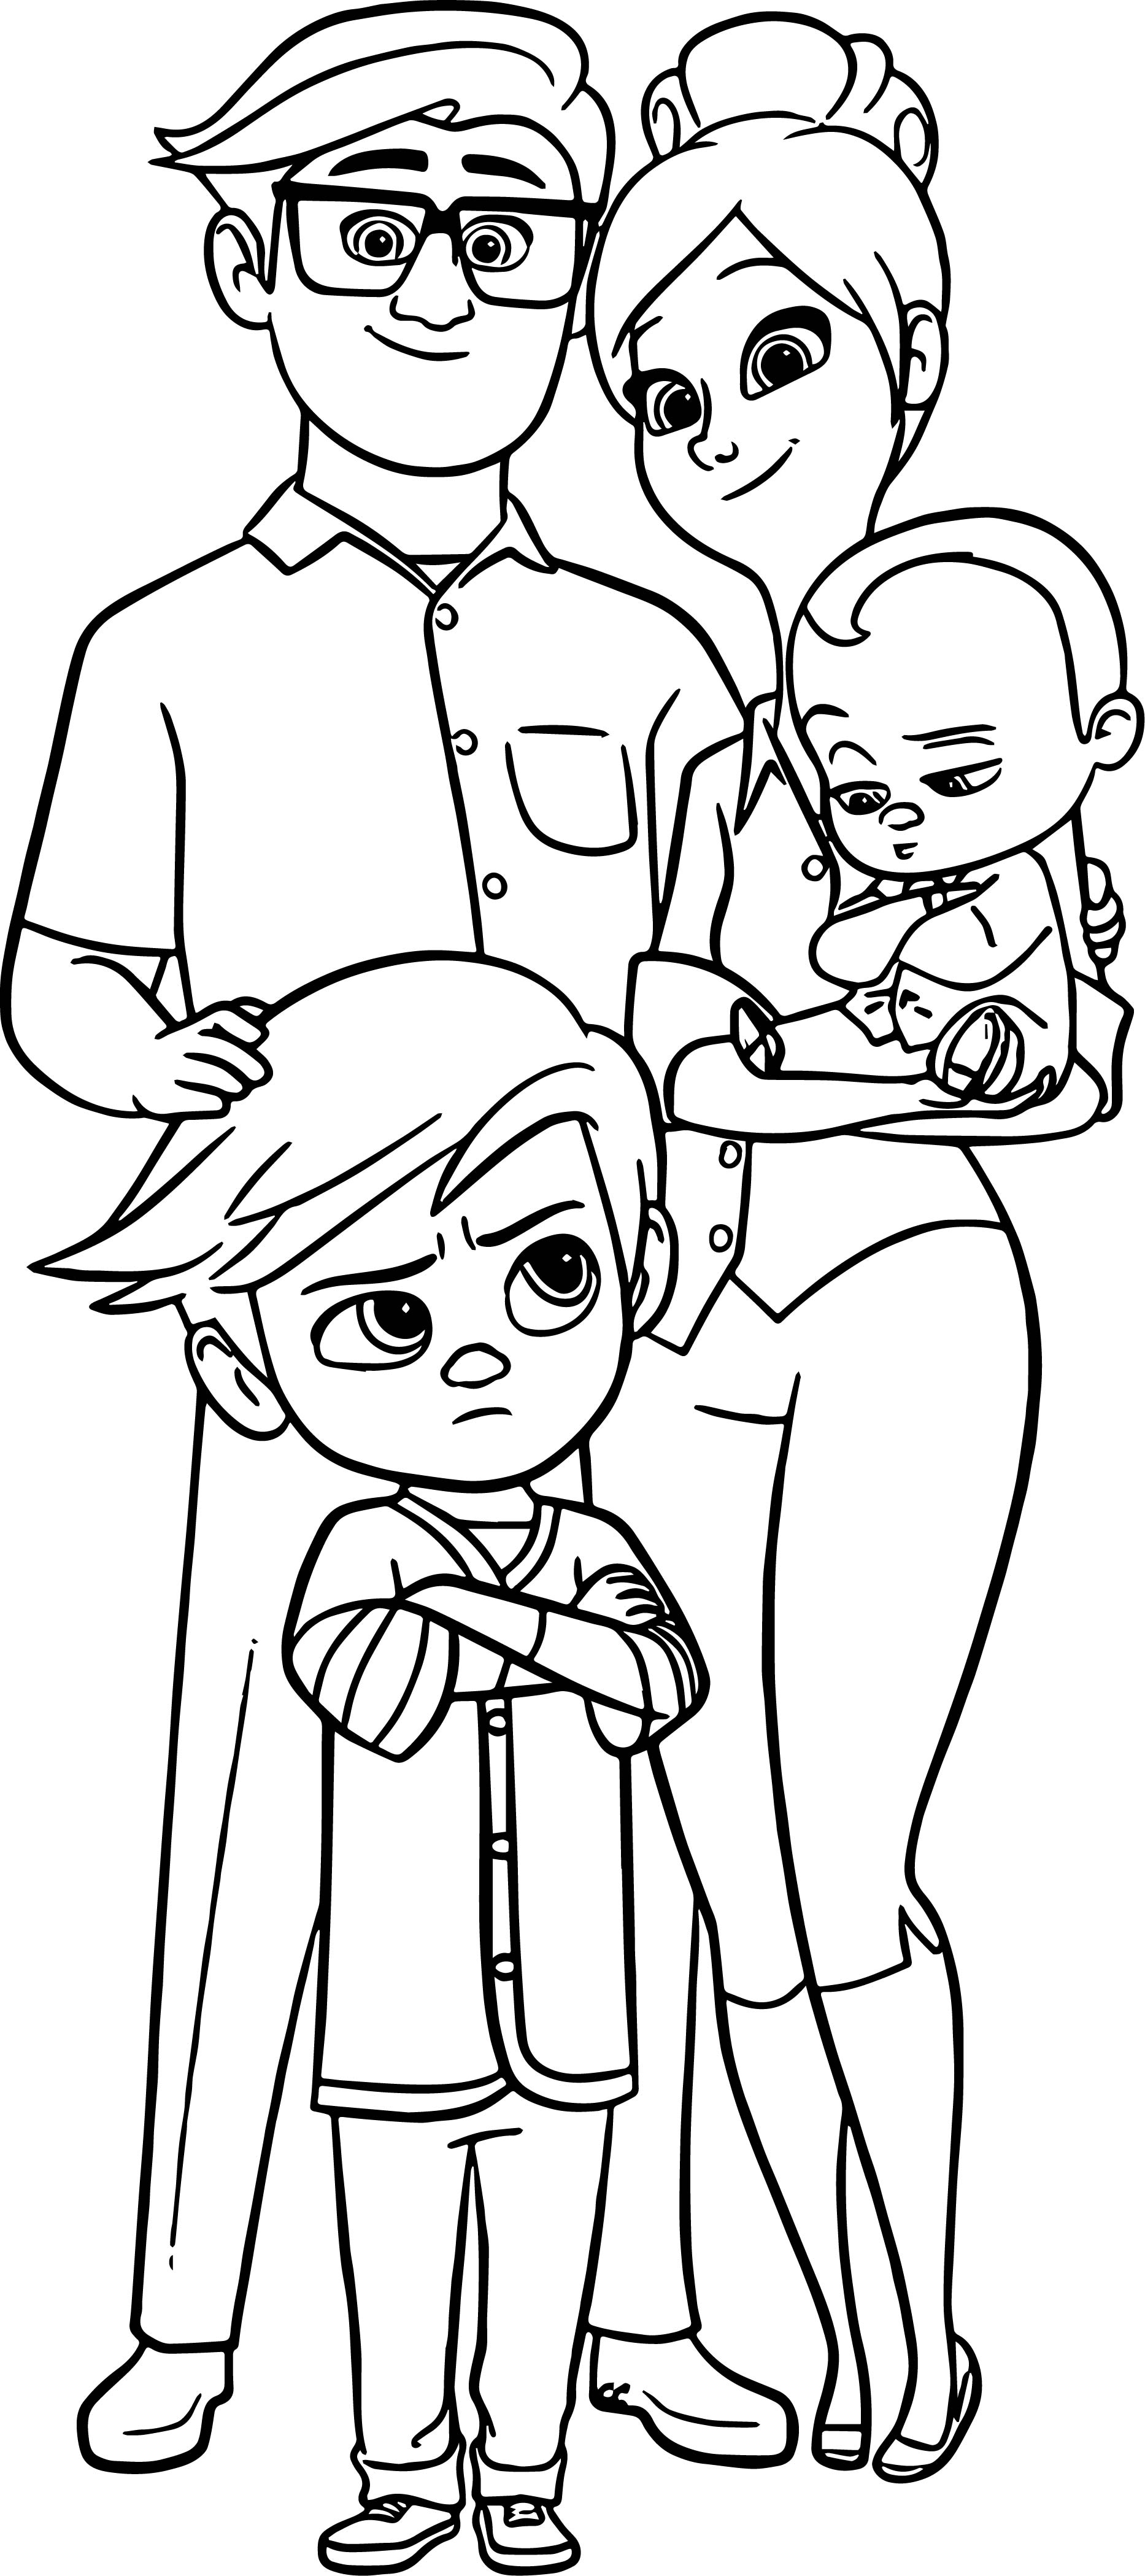 Cartoon Family Coloring Pages at GetColorings.com | Free printable ...